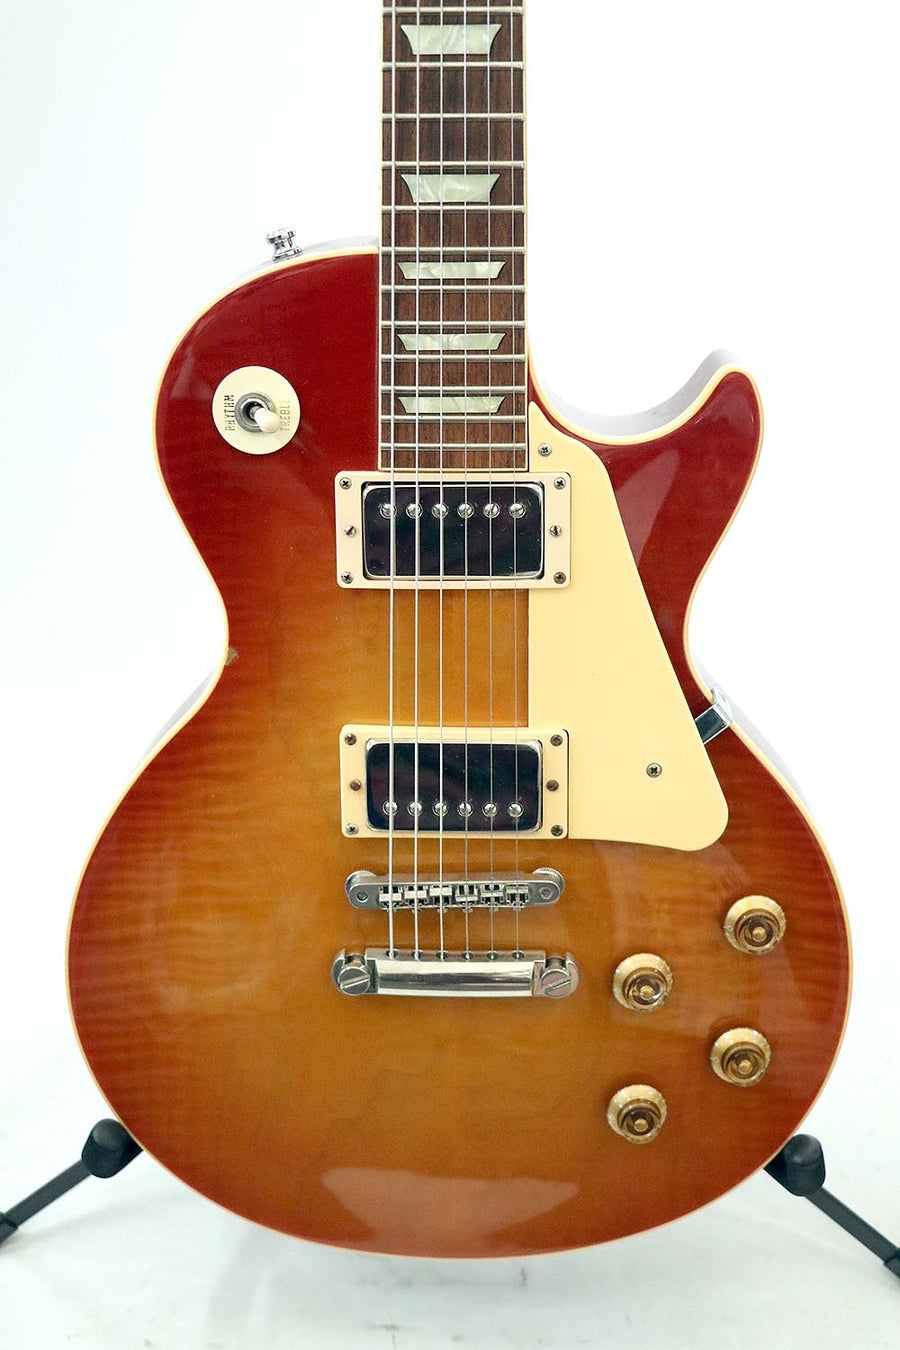 Navigator Les Paul with Bare Knuckle pickups